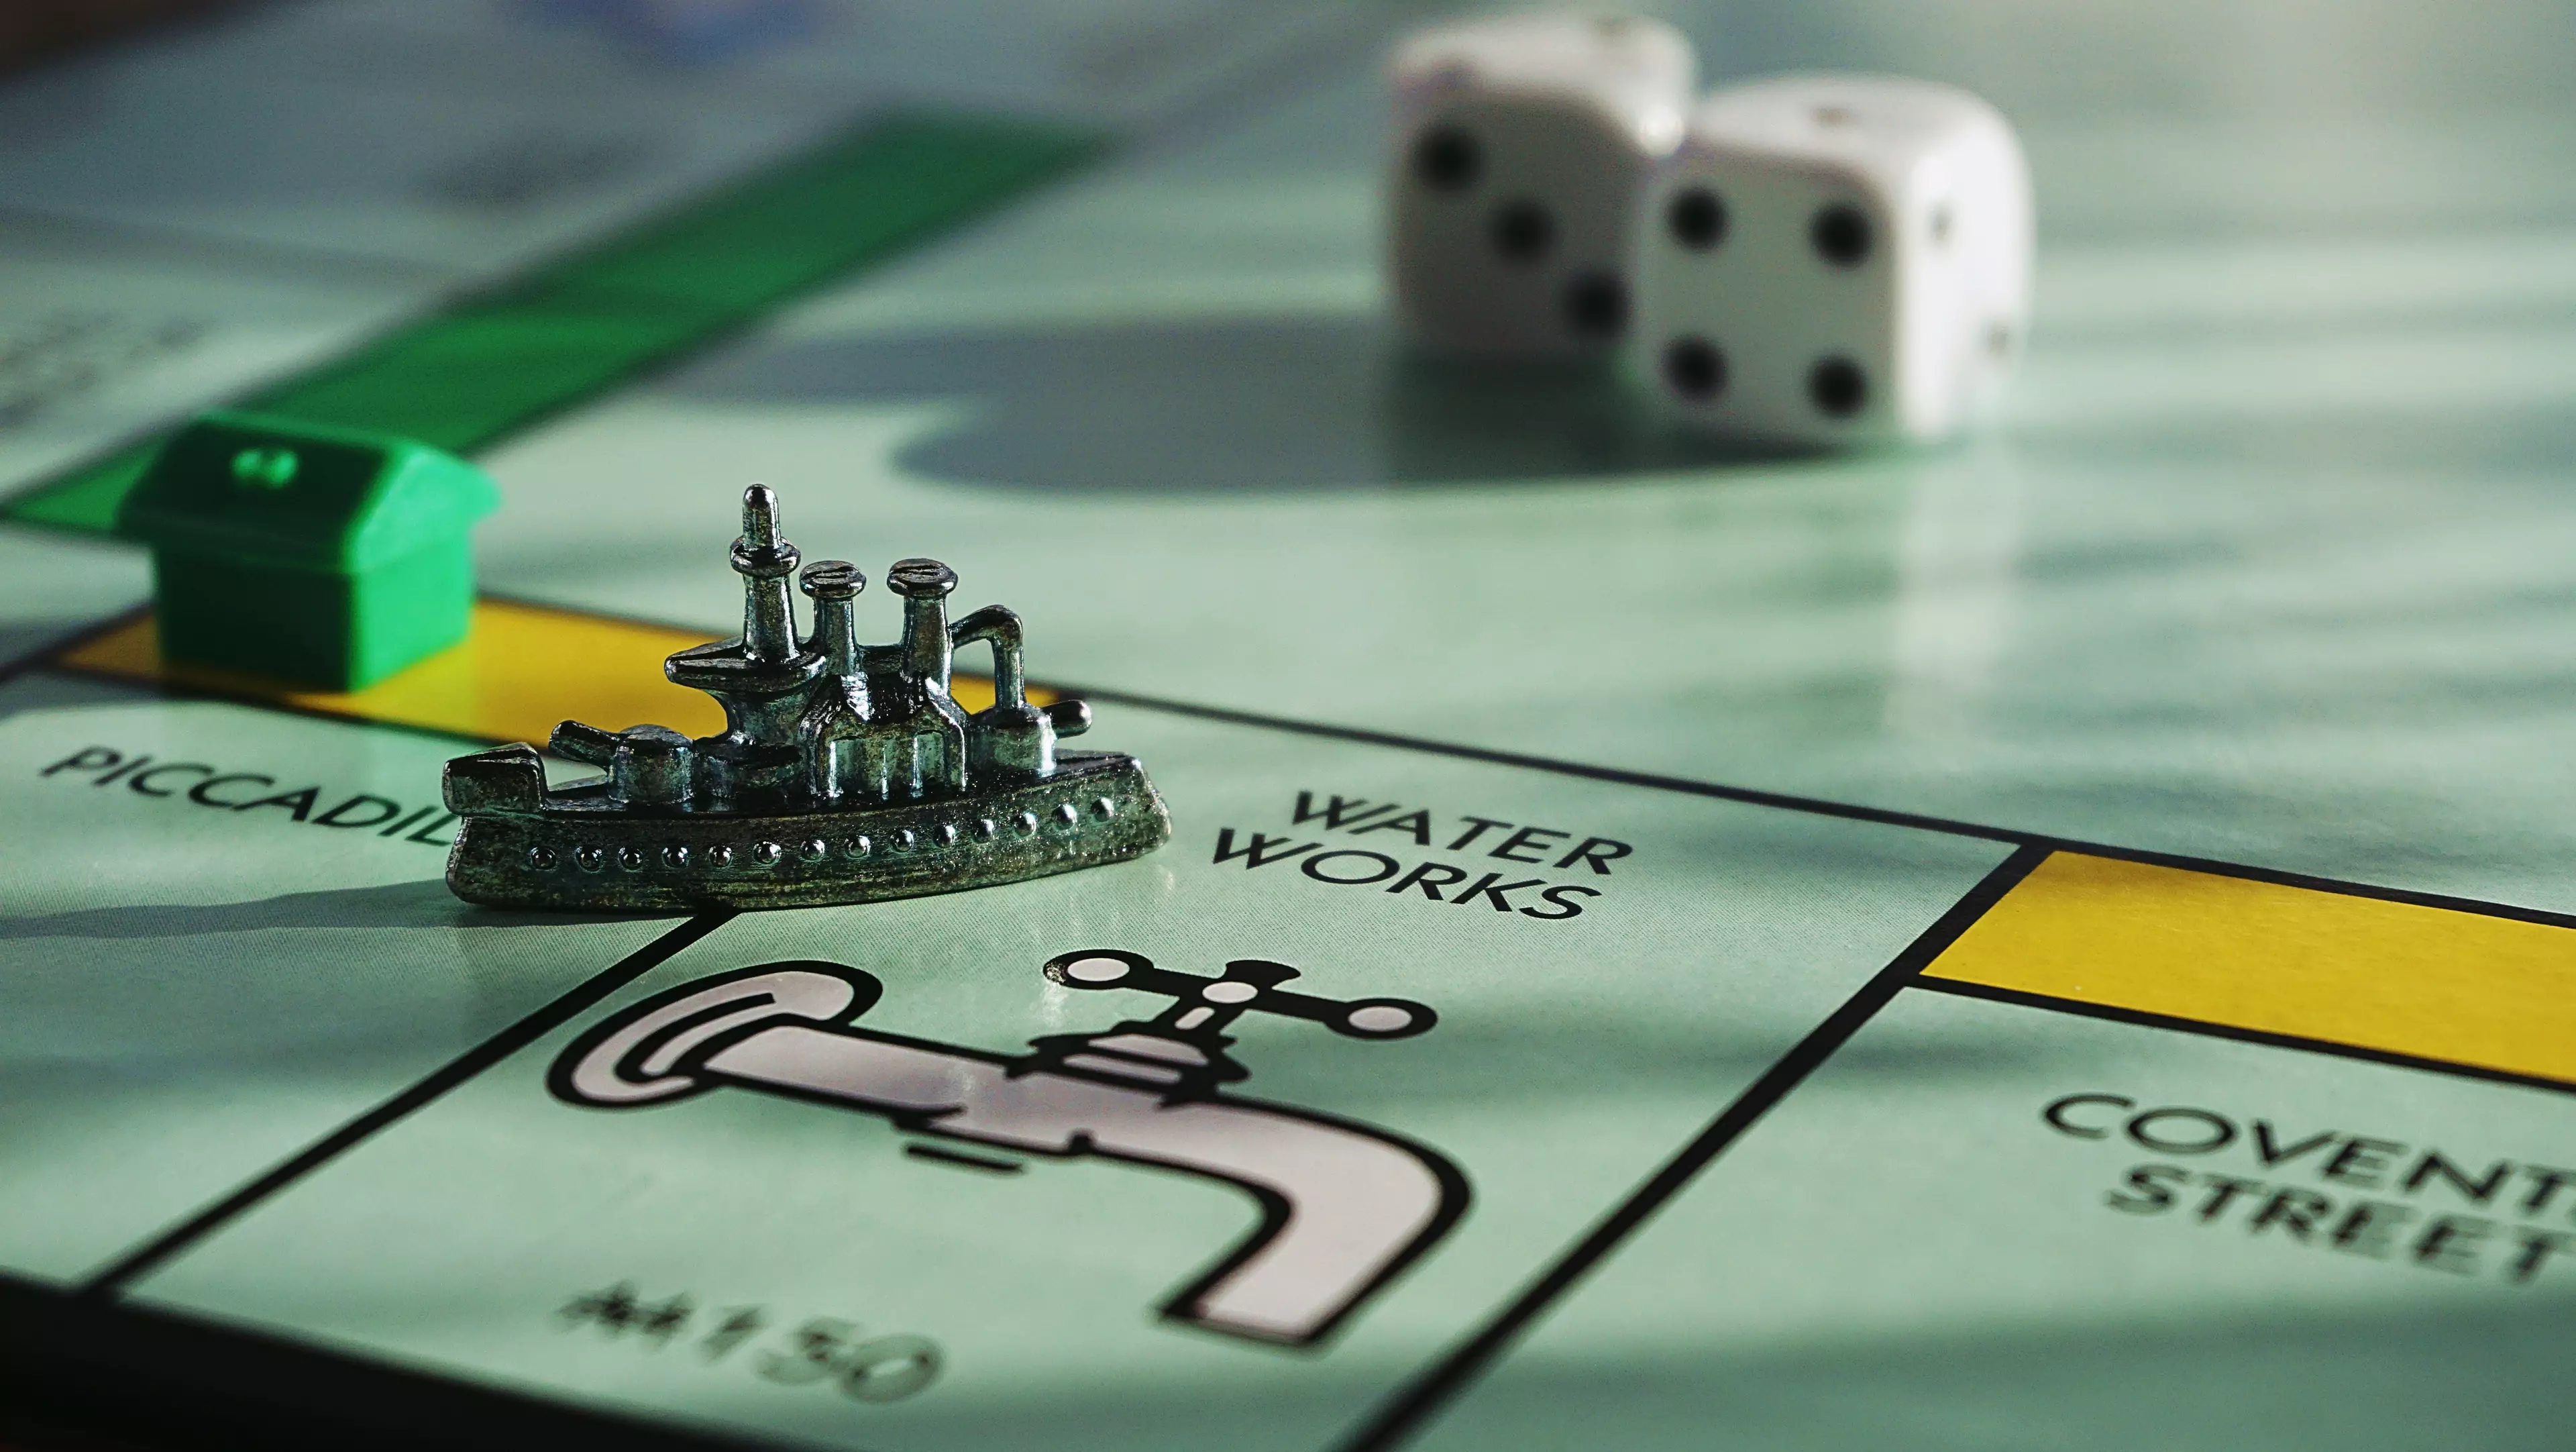 The game comes after it was announced that an immersive Monopoly experience is coming to London (